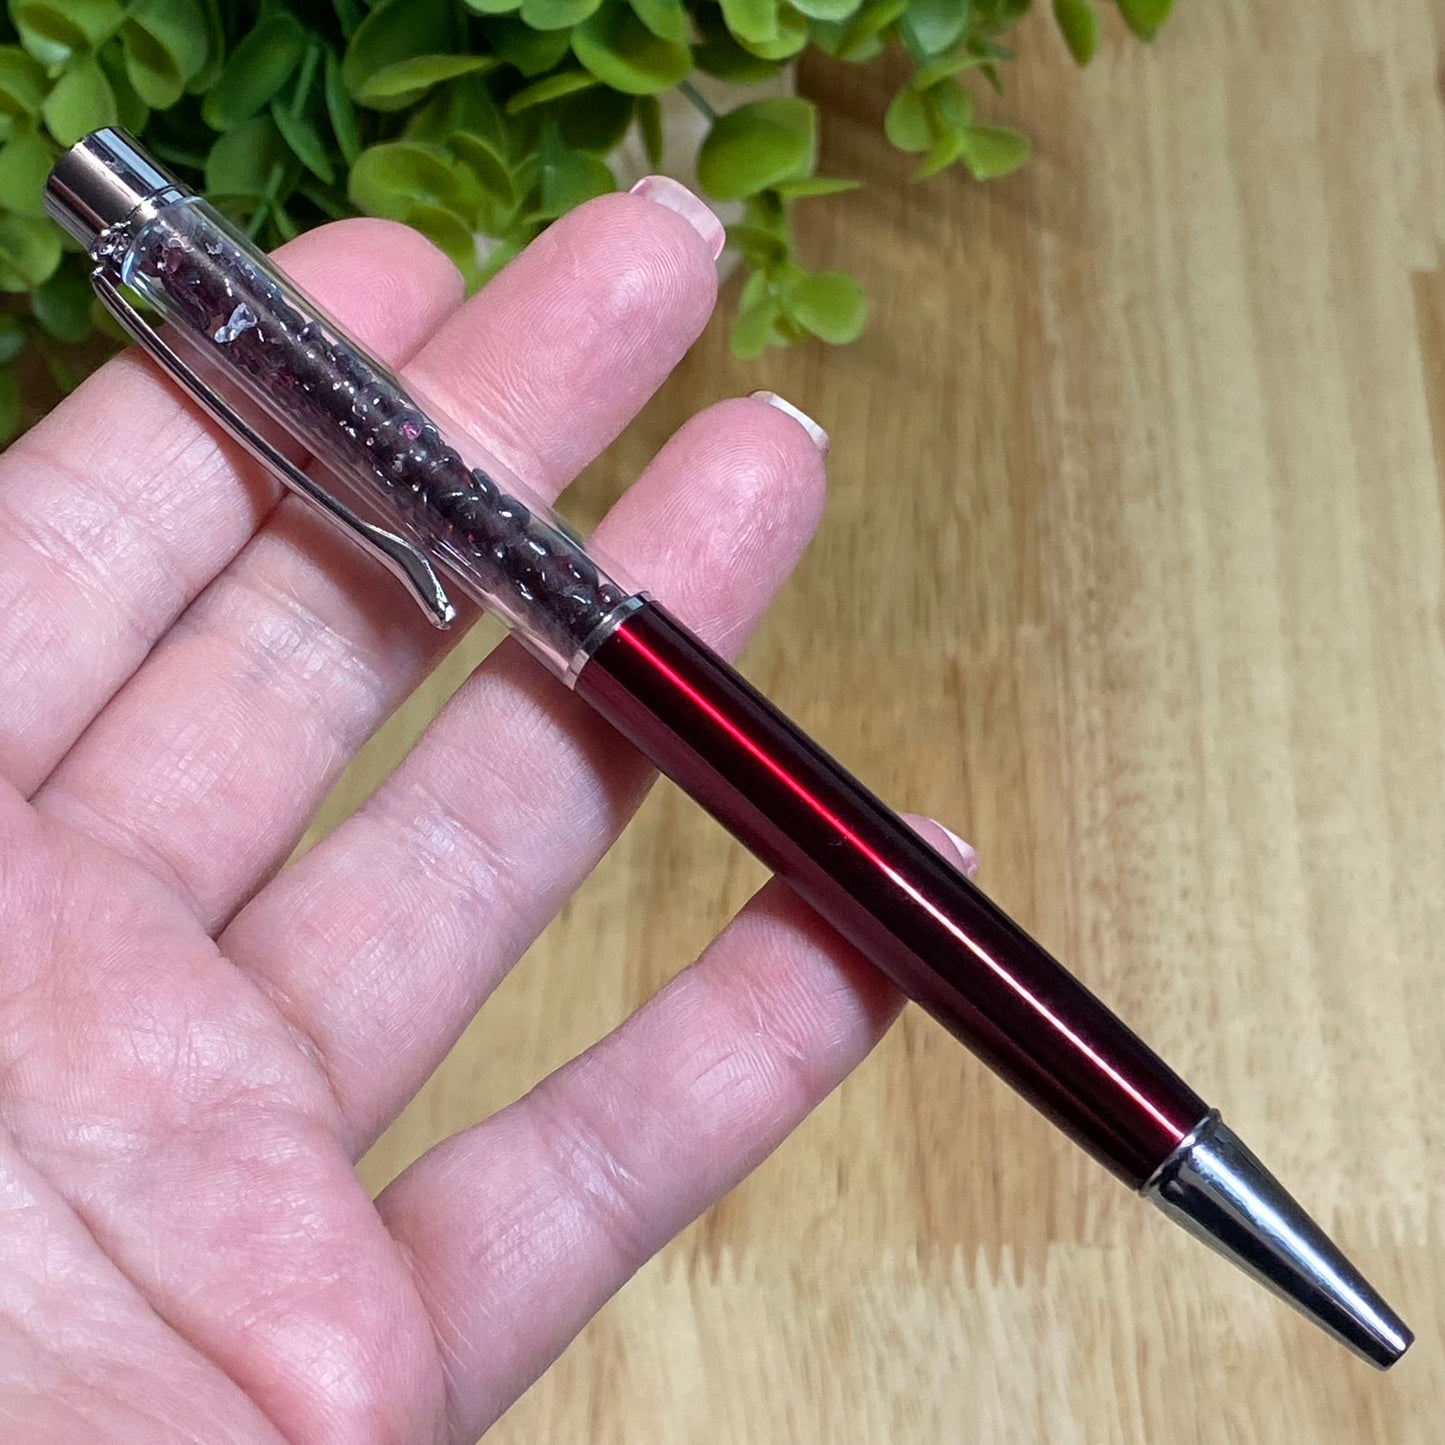 Crystal Chip Pen - Garnet for Romance, Self-confidence and Passion